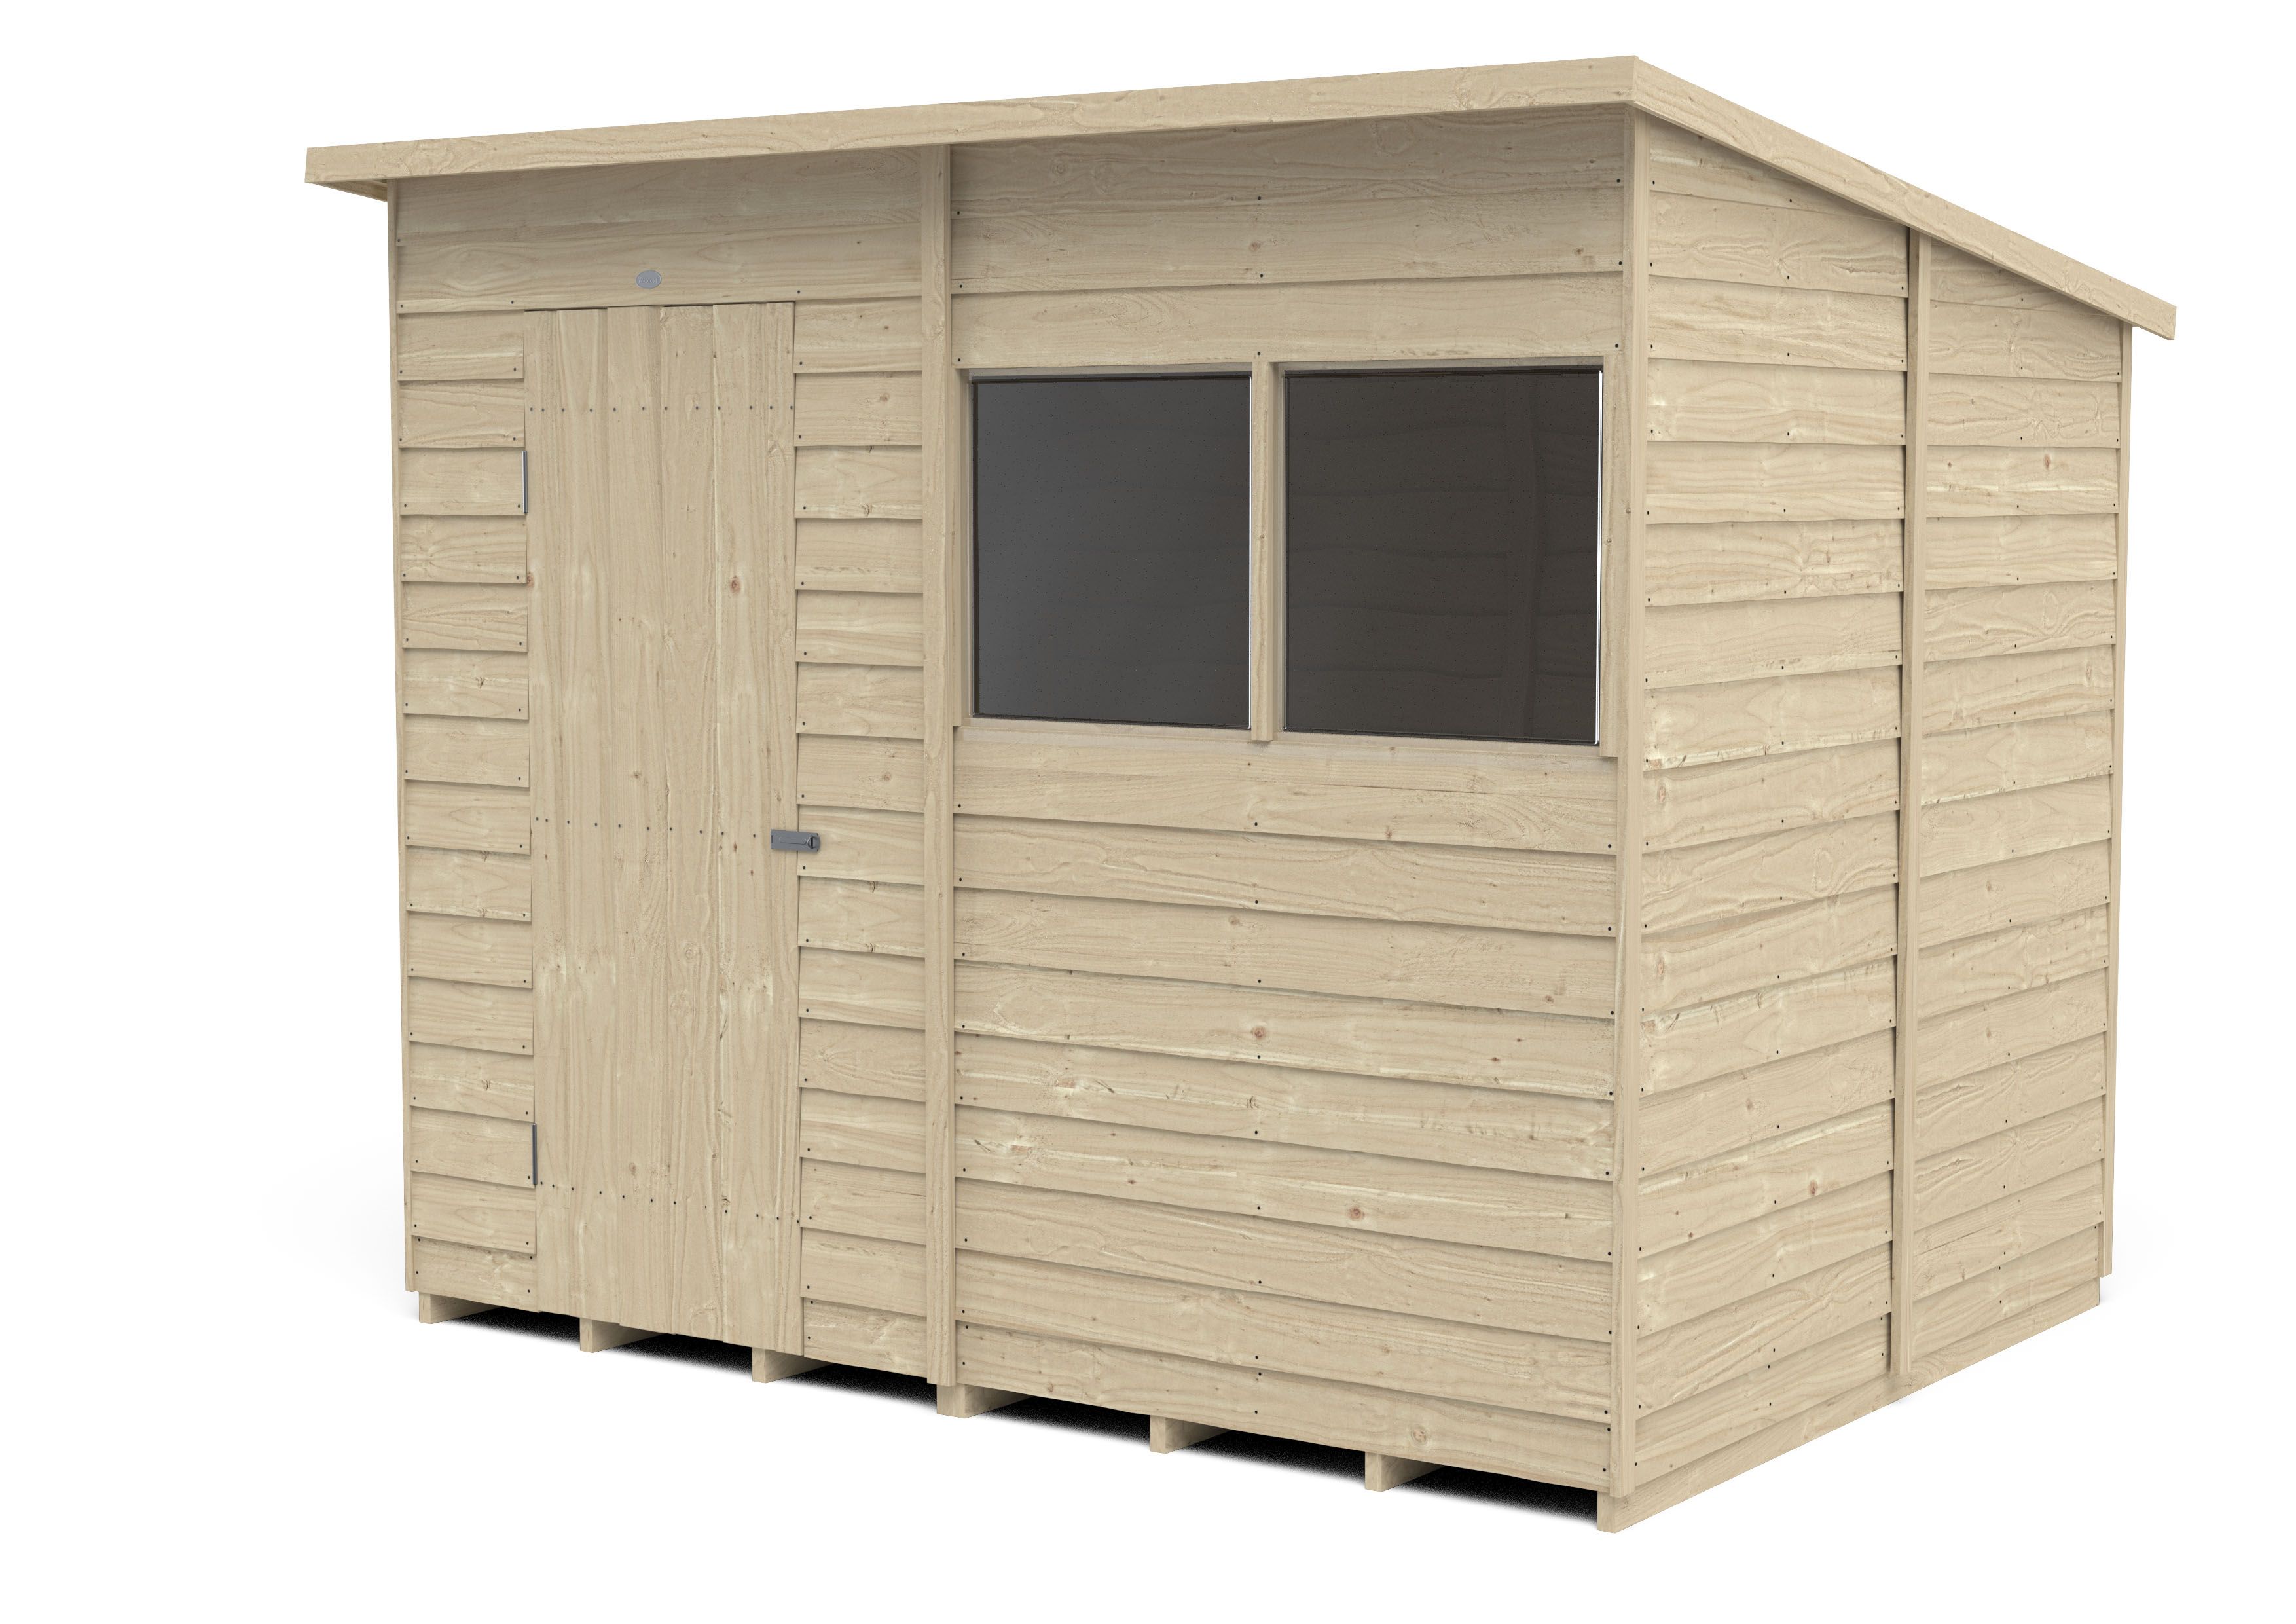 Forest Garden Overlap 8x6 ft Pent Wooden Pressure treated Shed with floor & 2 windows